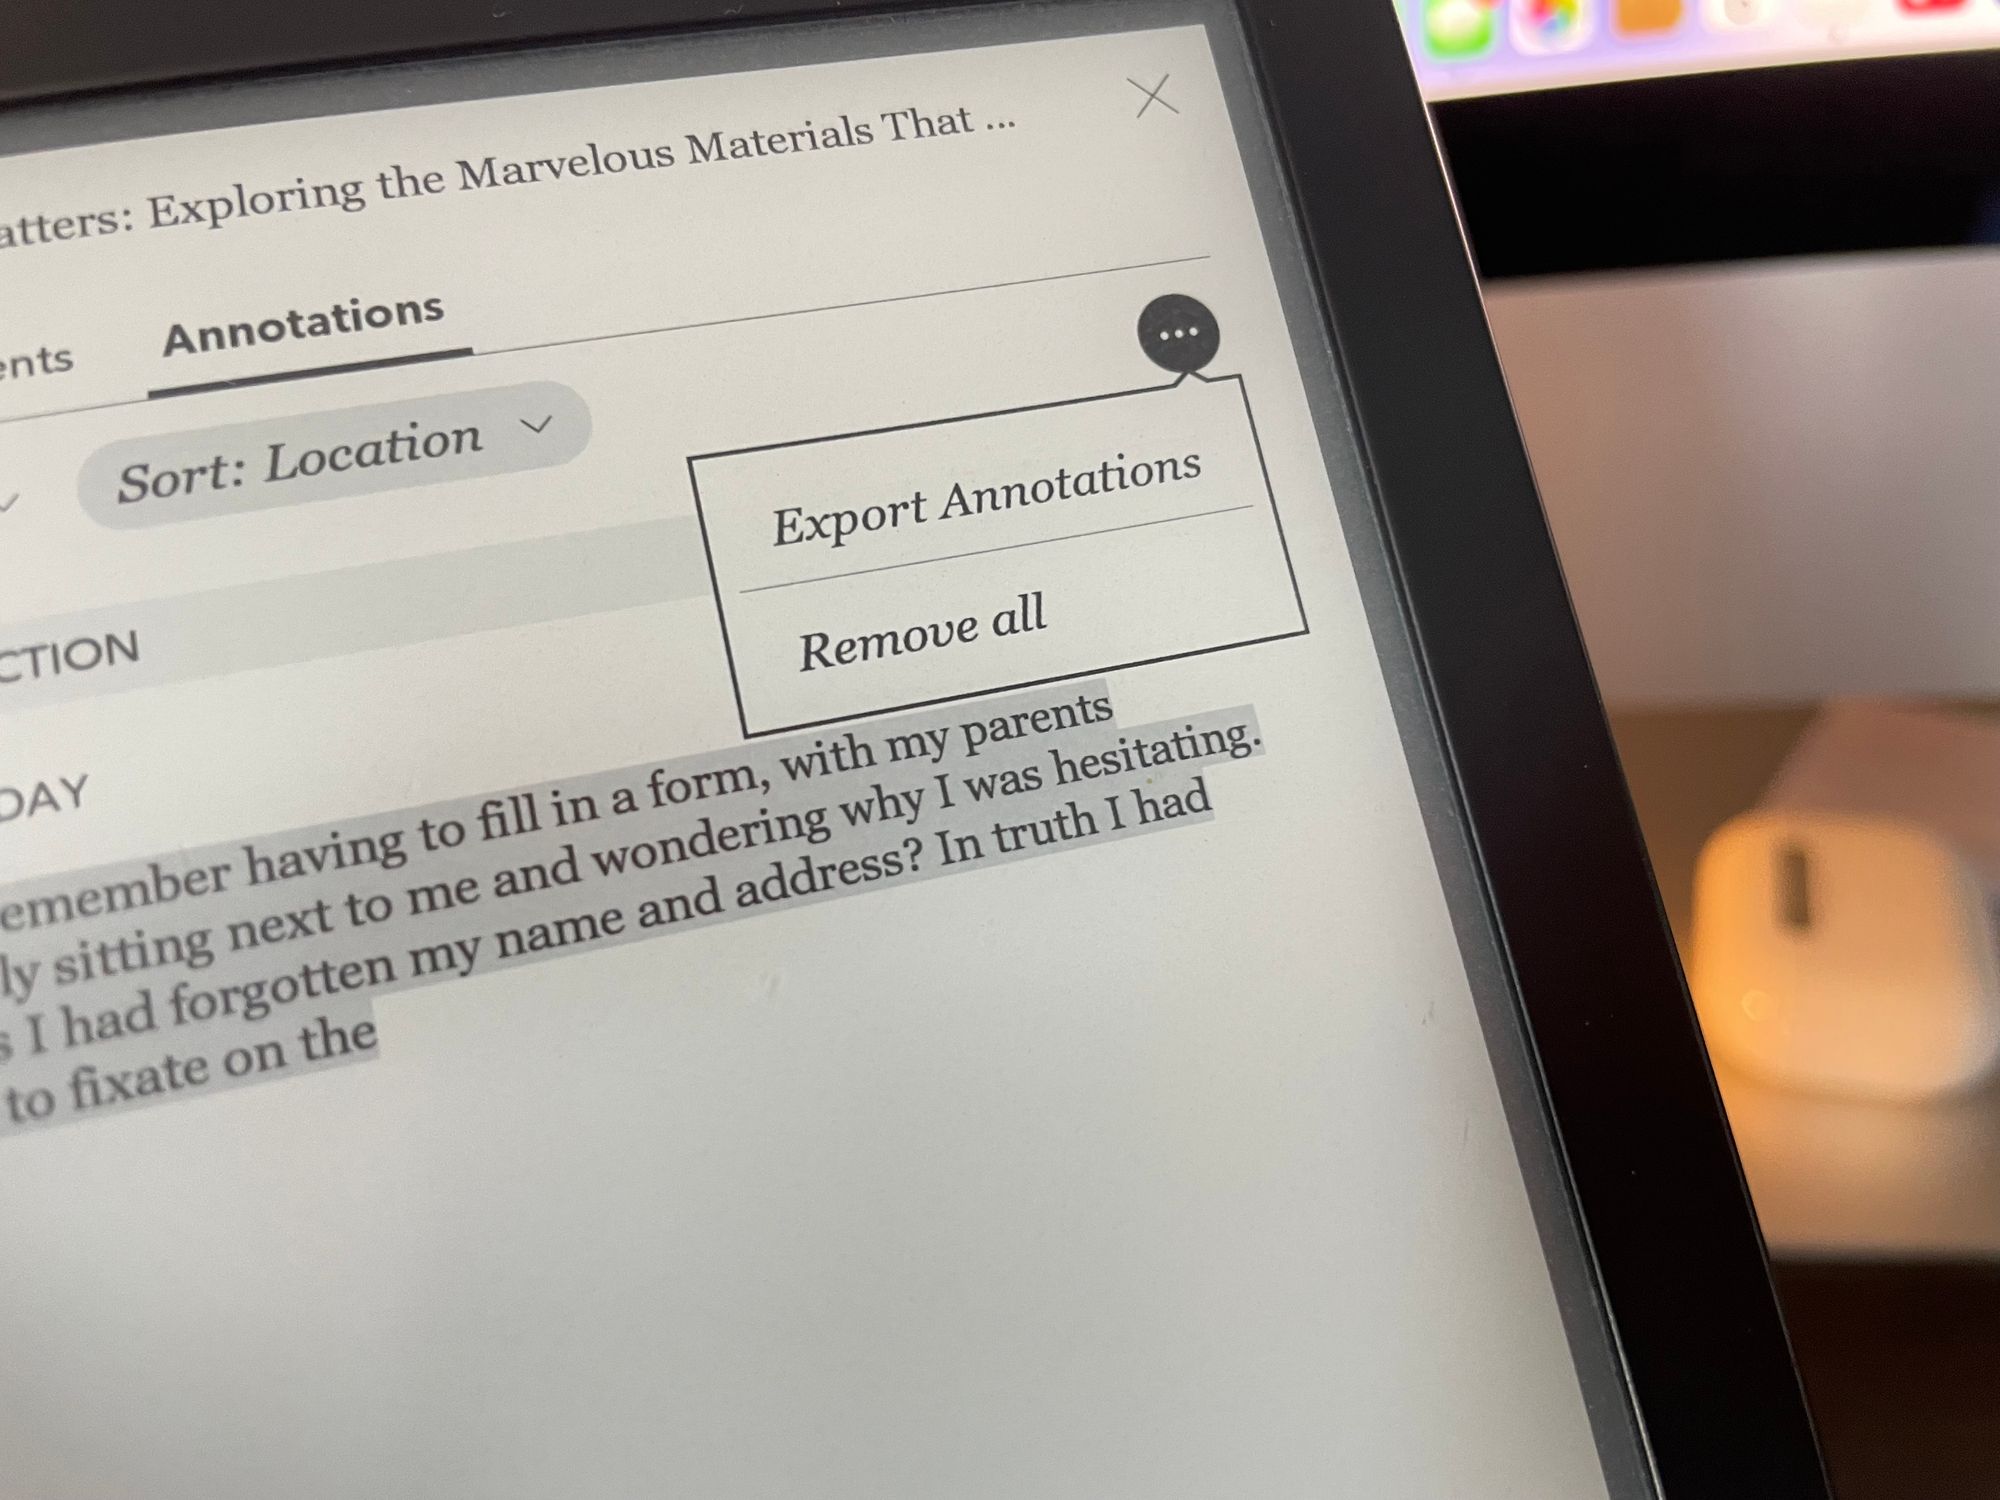 Photo of the Kobo e-reader showing the "export annotations" function